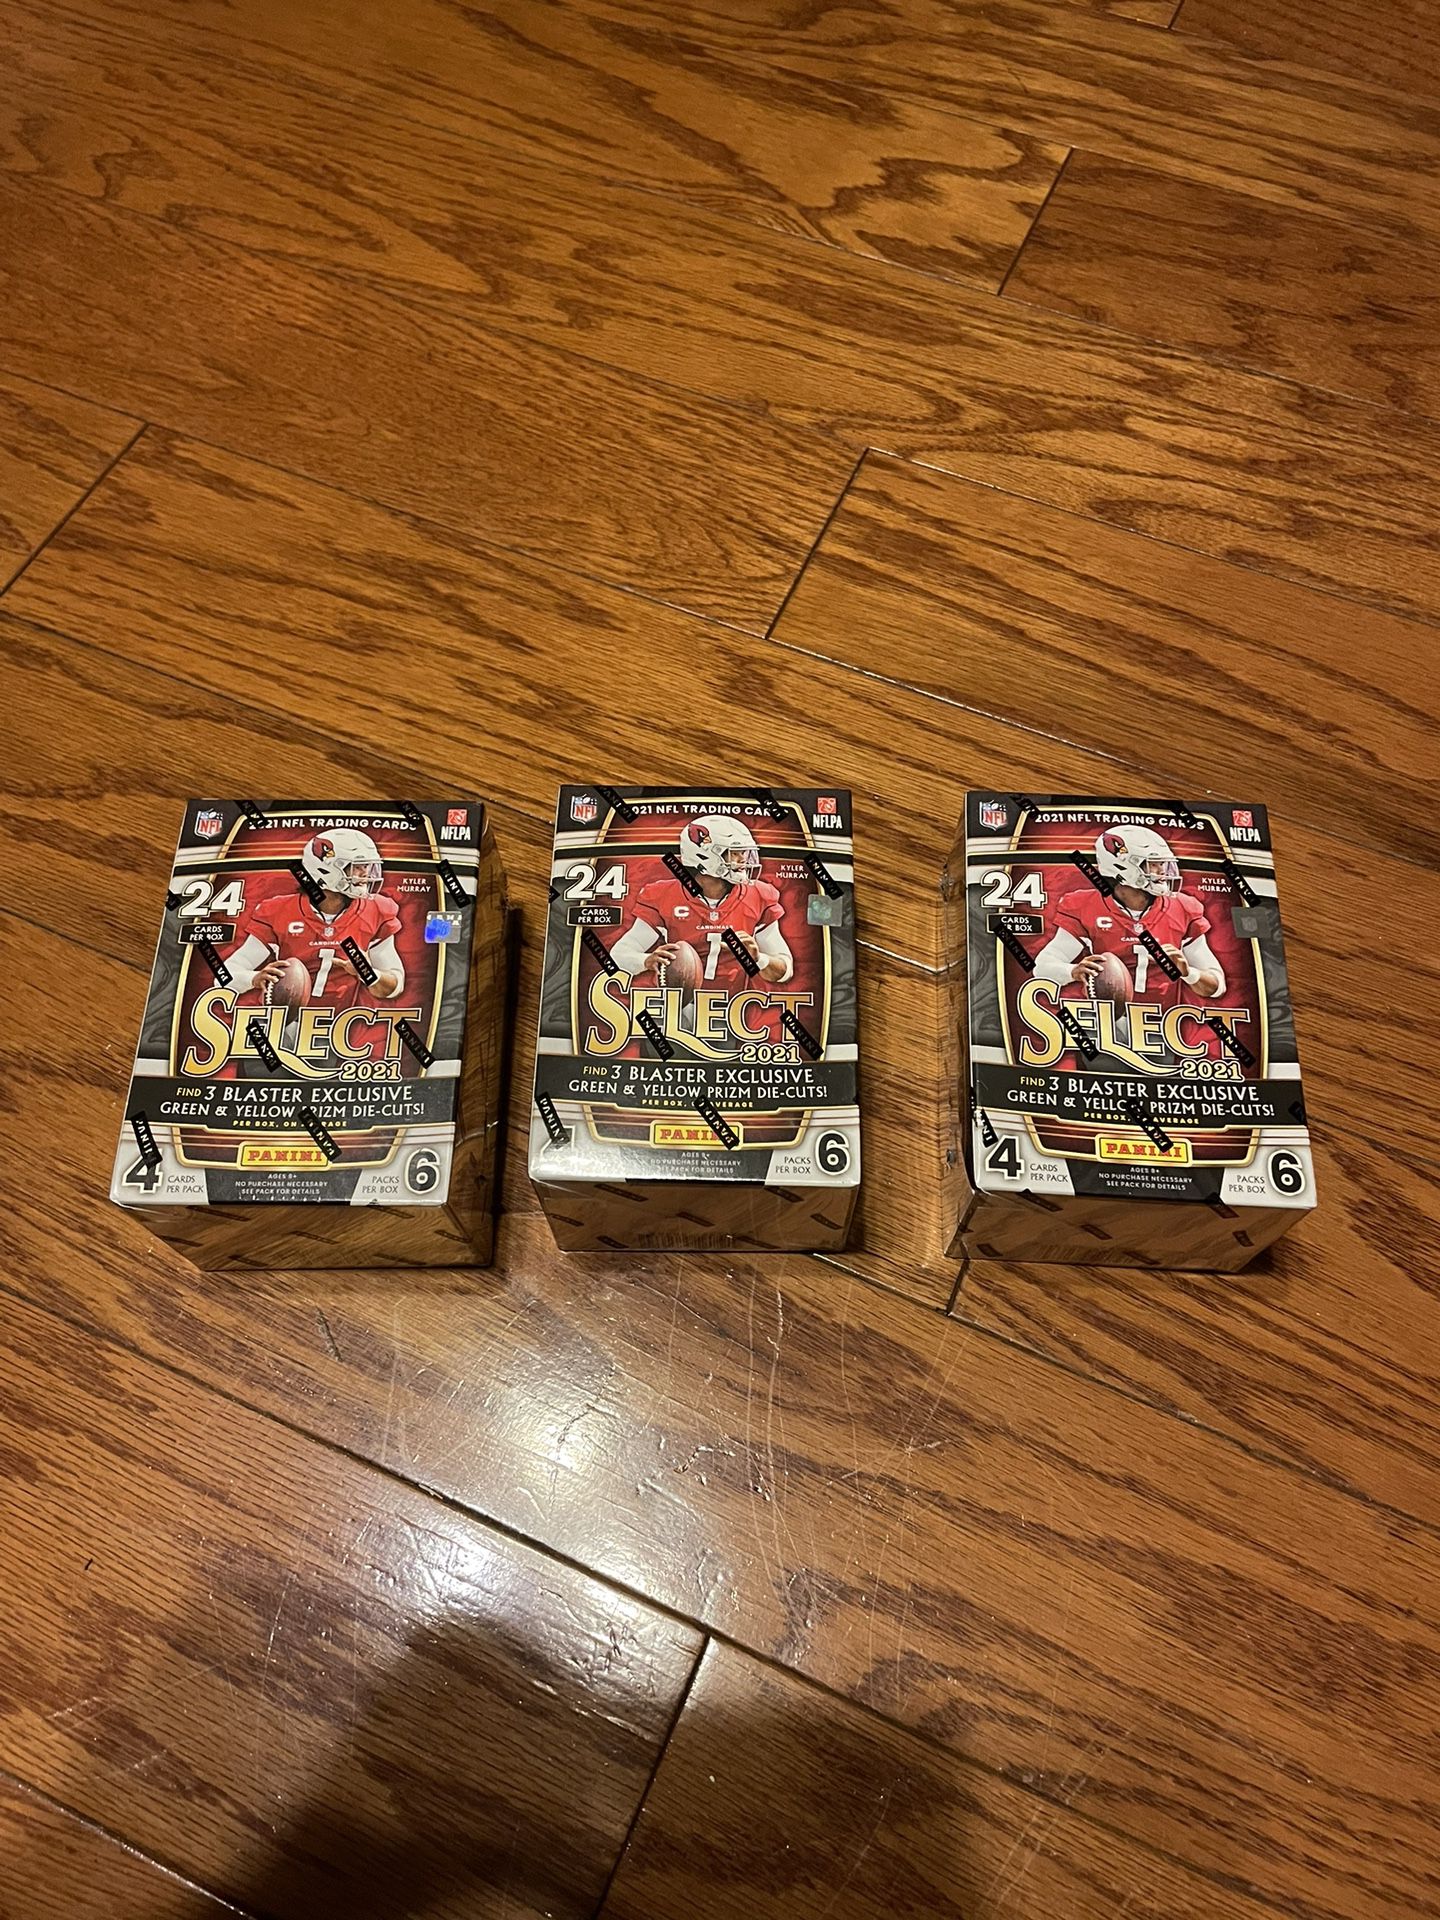 Nfl Select Blasters 